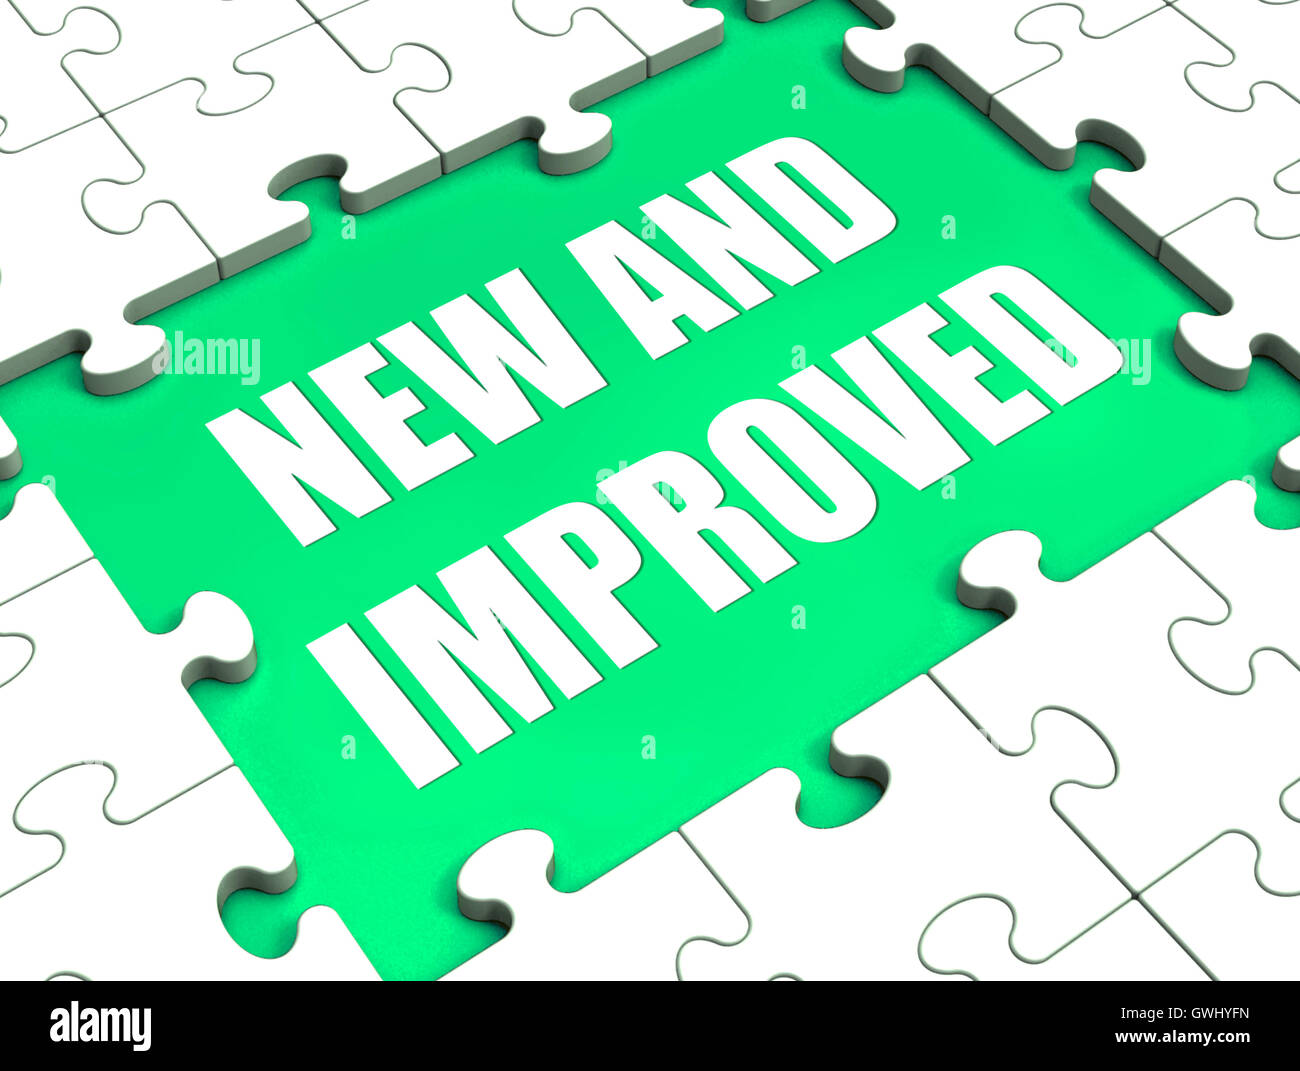 New And Improved Puzzle Shows Improved And Upgraded Stock Photo